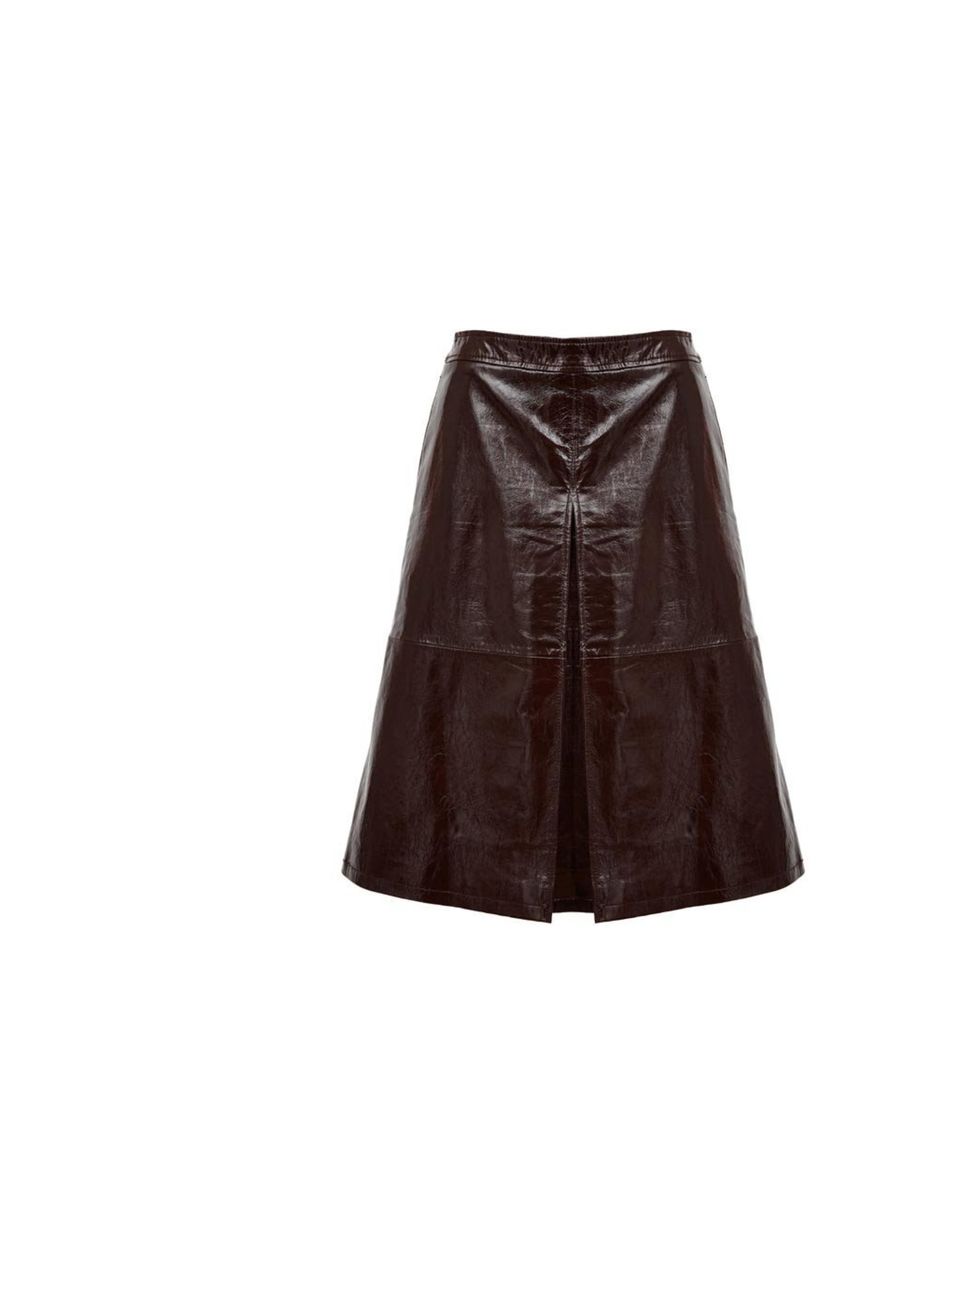 <p><a href="http://www.asos.com/ASOS/ASOS-A-Line-Midi-Skirt-in-Patent-Leather/Prod/pgeproduct.aspx?iid=2908663&amp;SearchQuery=patent%20skirt&amp;sh=0&amp;pge=0&amp;pgesize=36&amp;sort=-1&amp;clr=Burgundy">Asos skirt</a>, was £120, now £72</p><p>Don't mis